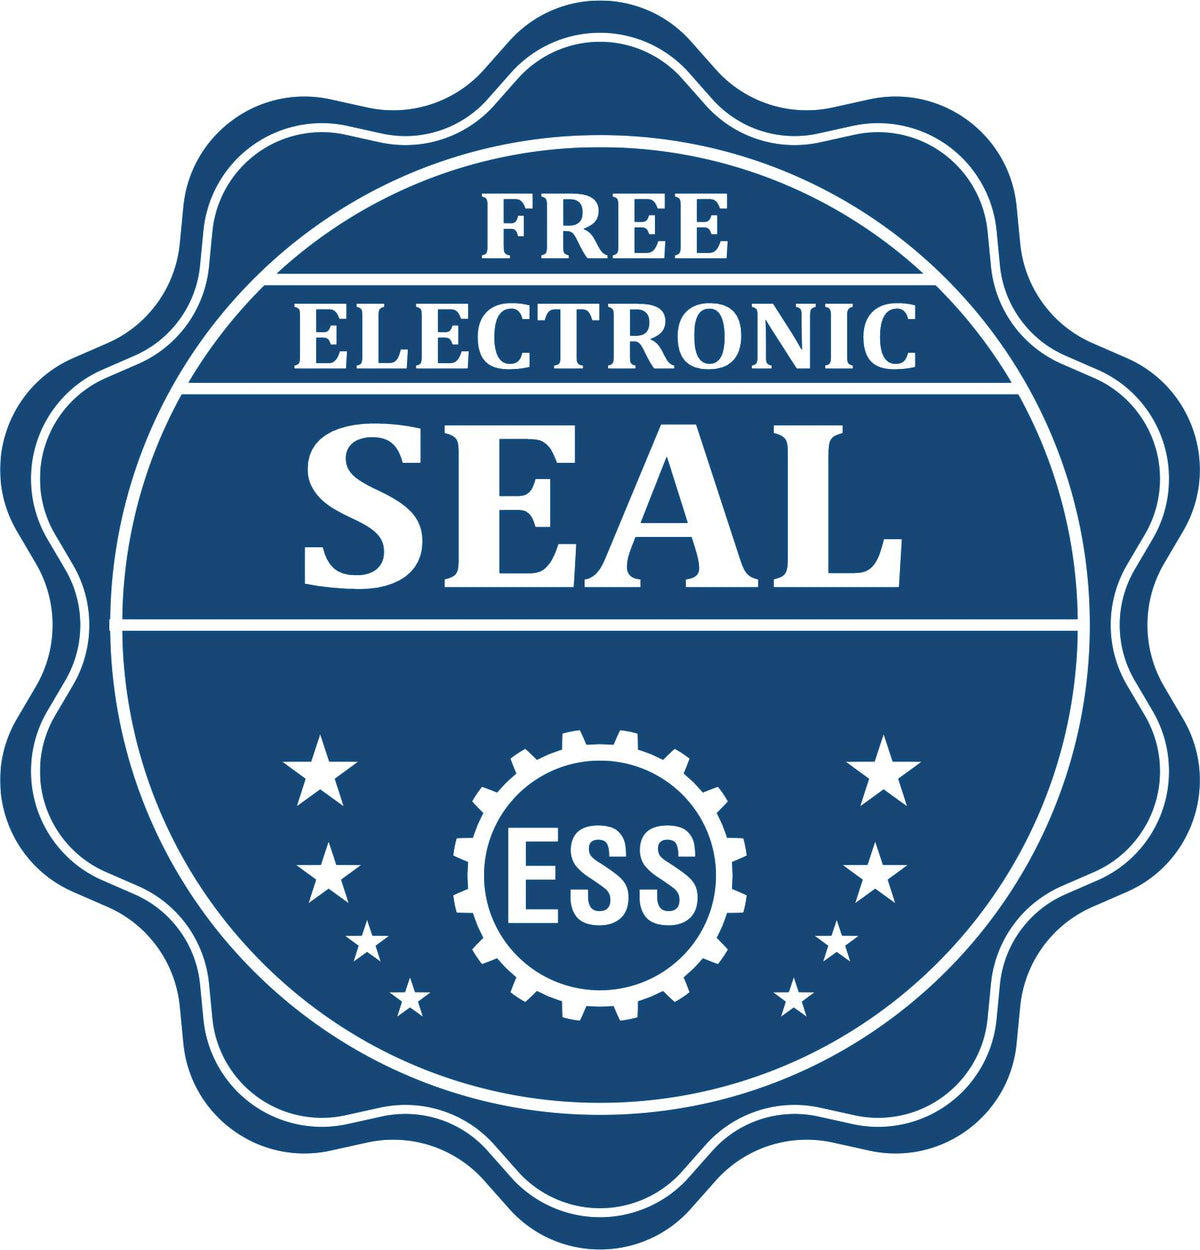 A badge showing a free electronic seal for the Heavy Duty Cast Iron Georgia Engineer Seal Embosser with stars and the ESS gear on the emblem.